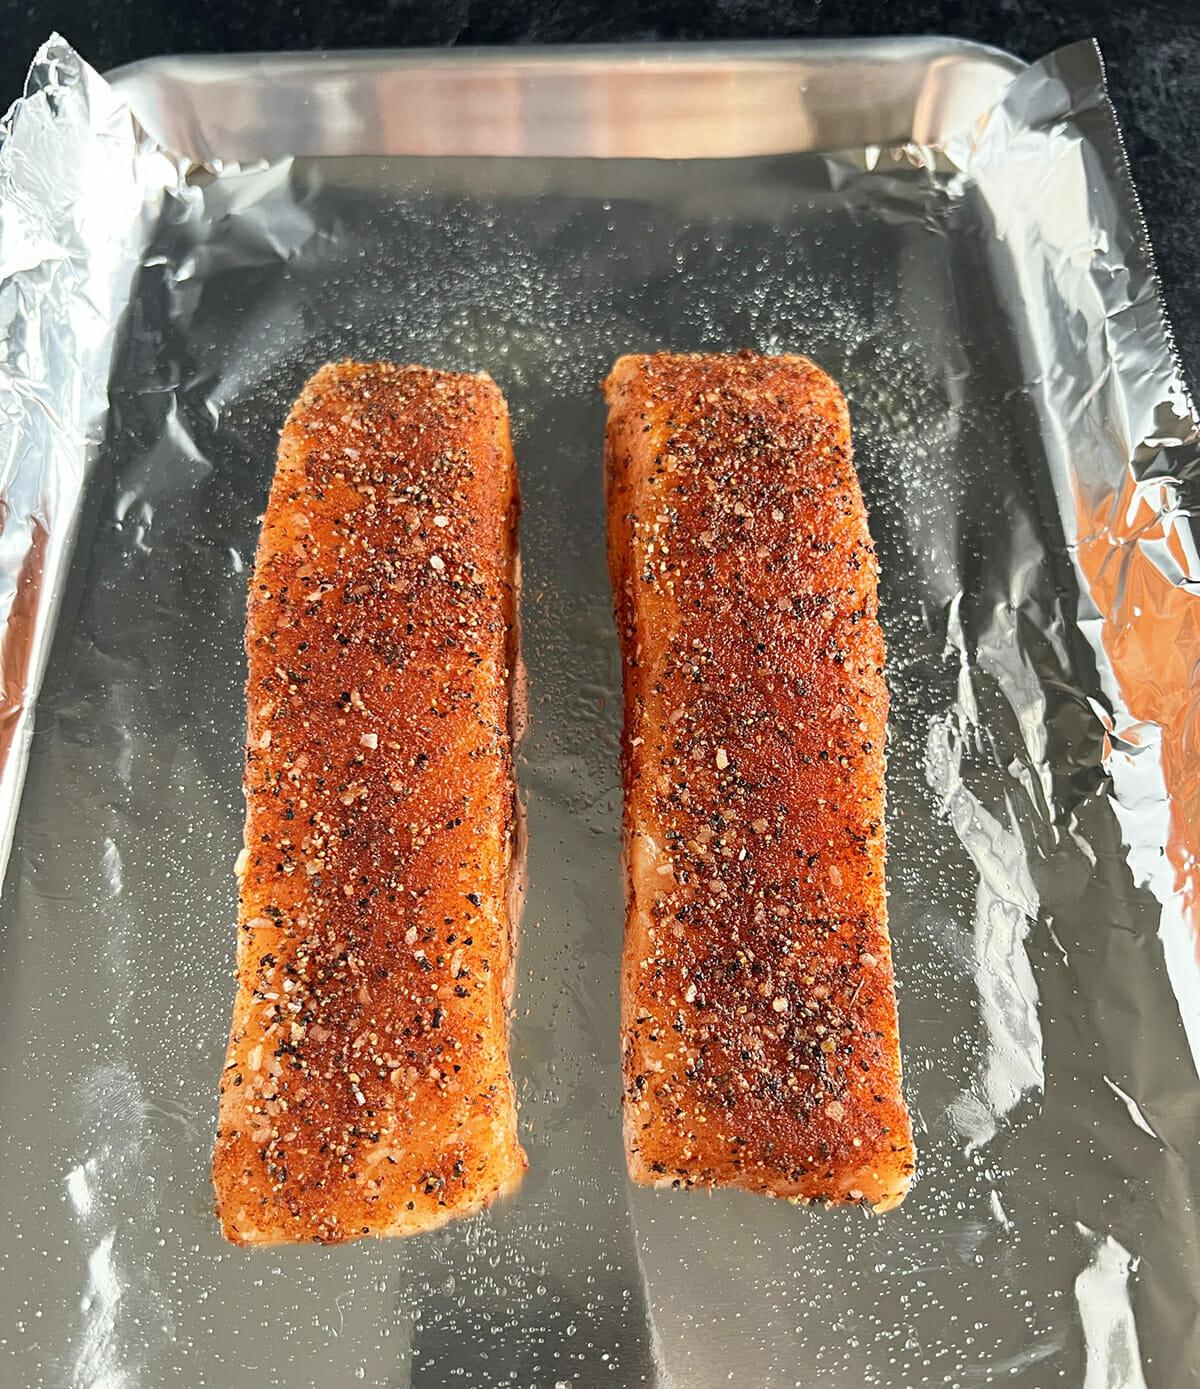 Tender, flaky salmon fillets baked in the oven.